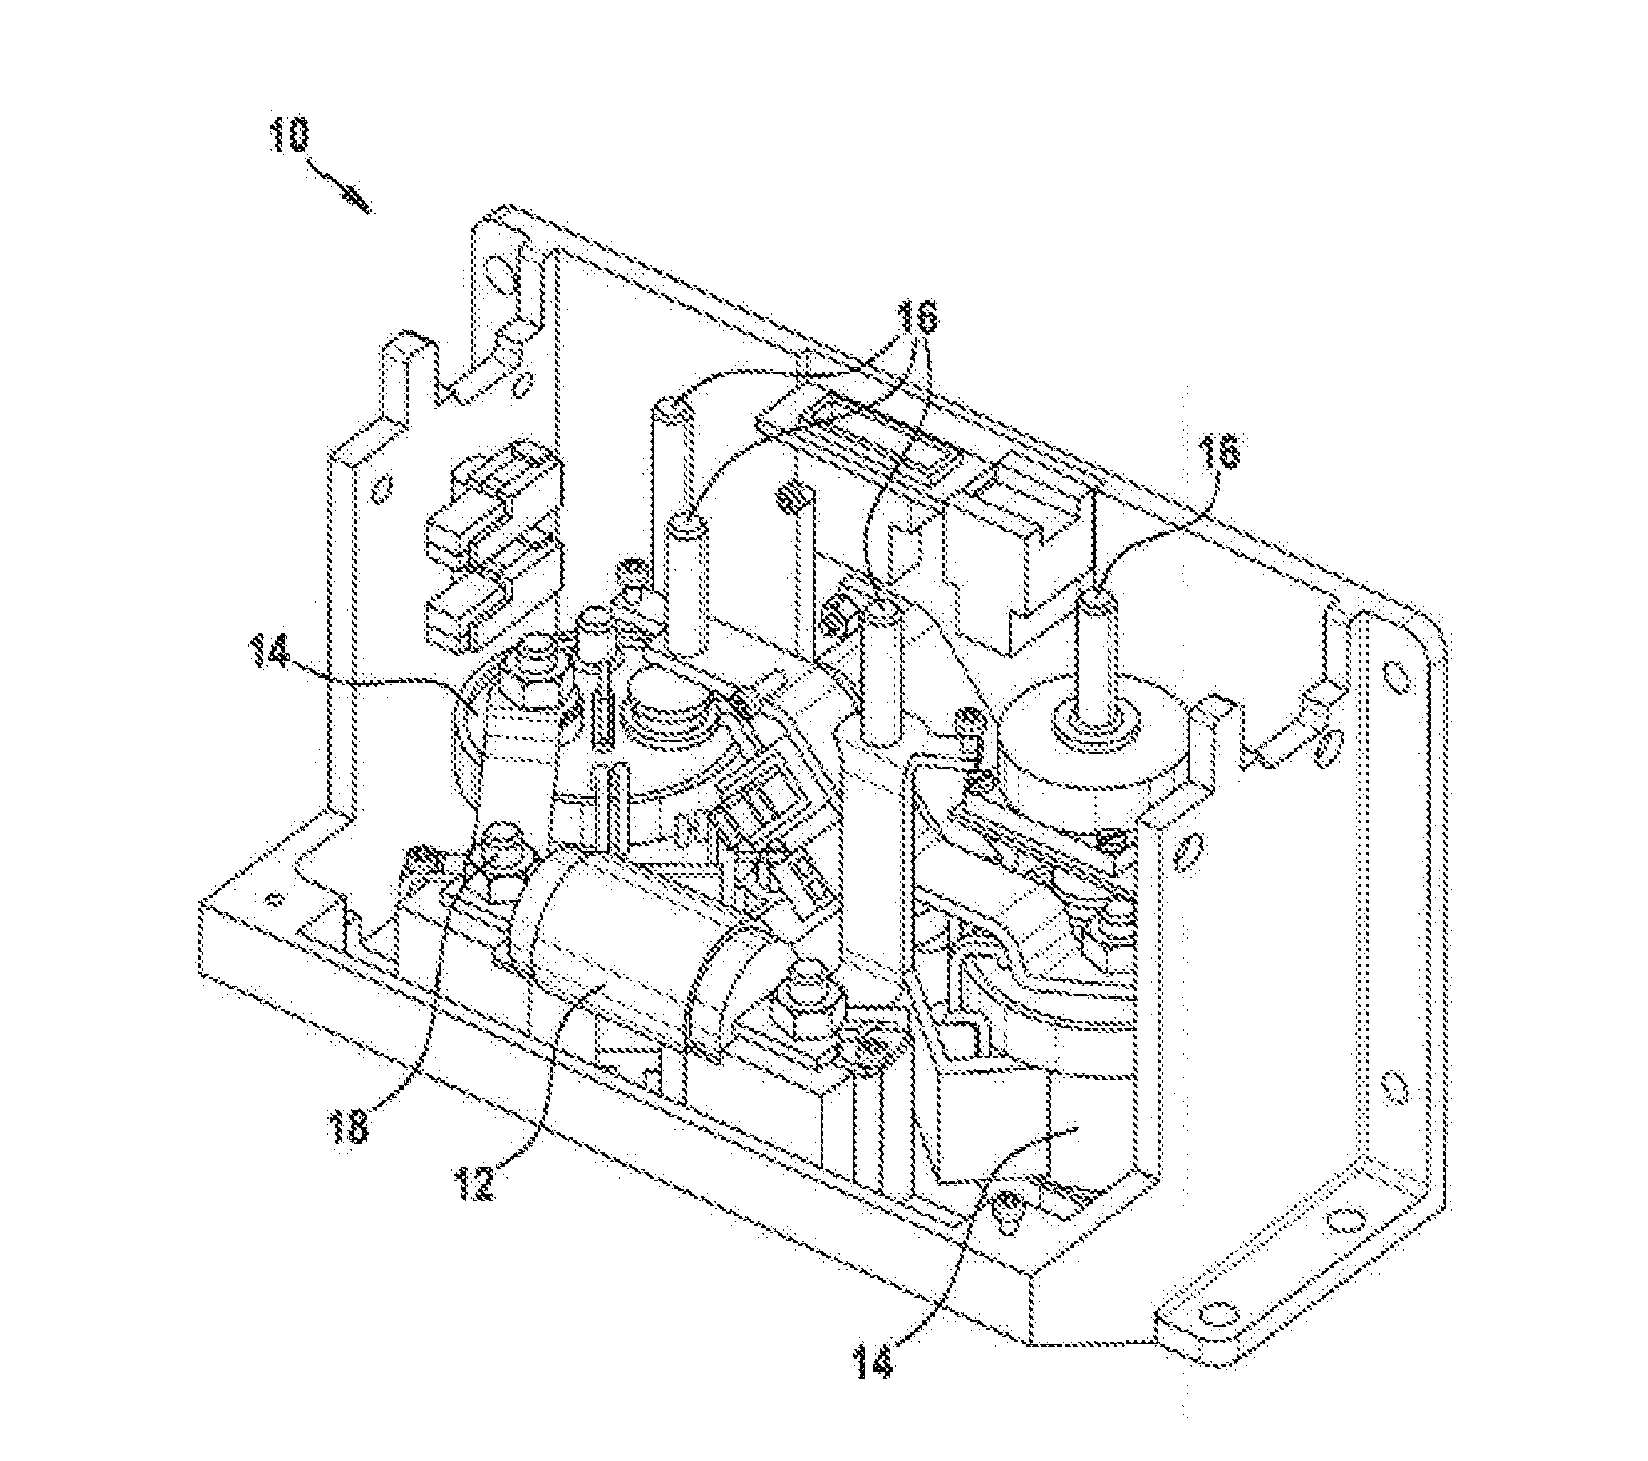 Disconnection unit for disconnecting a battery from a power system and a motor vehicle having a lithium-ion battery